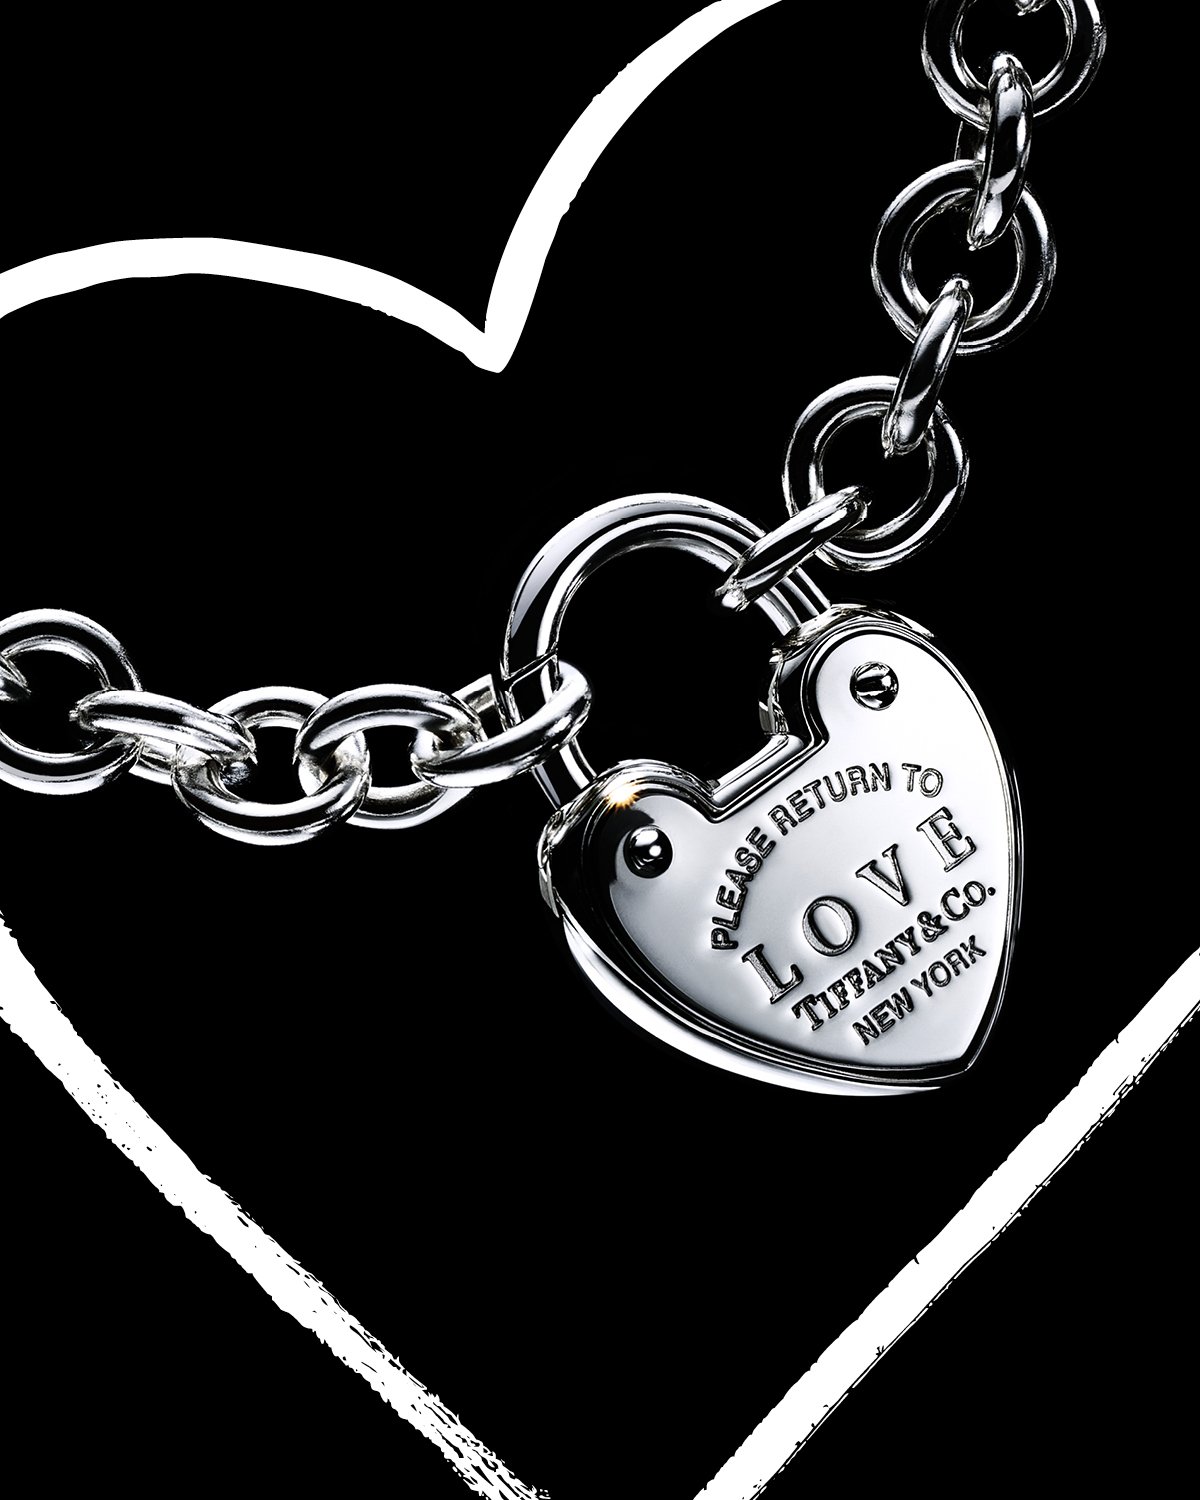 Sterling Silver Love Lock Necklace